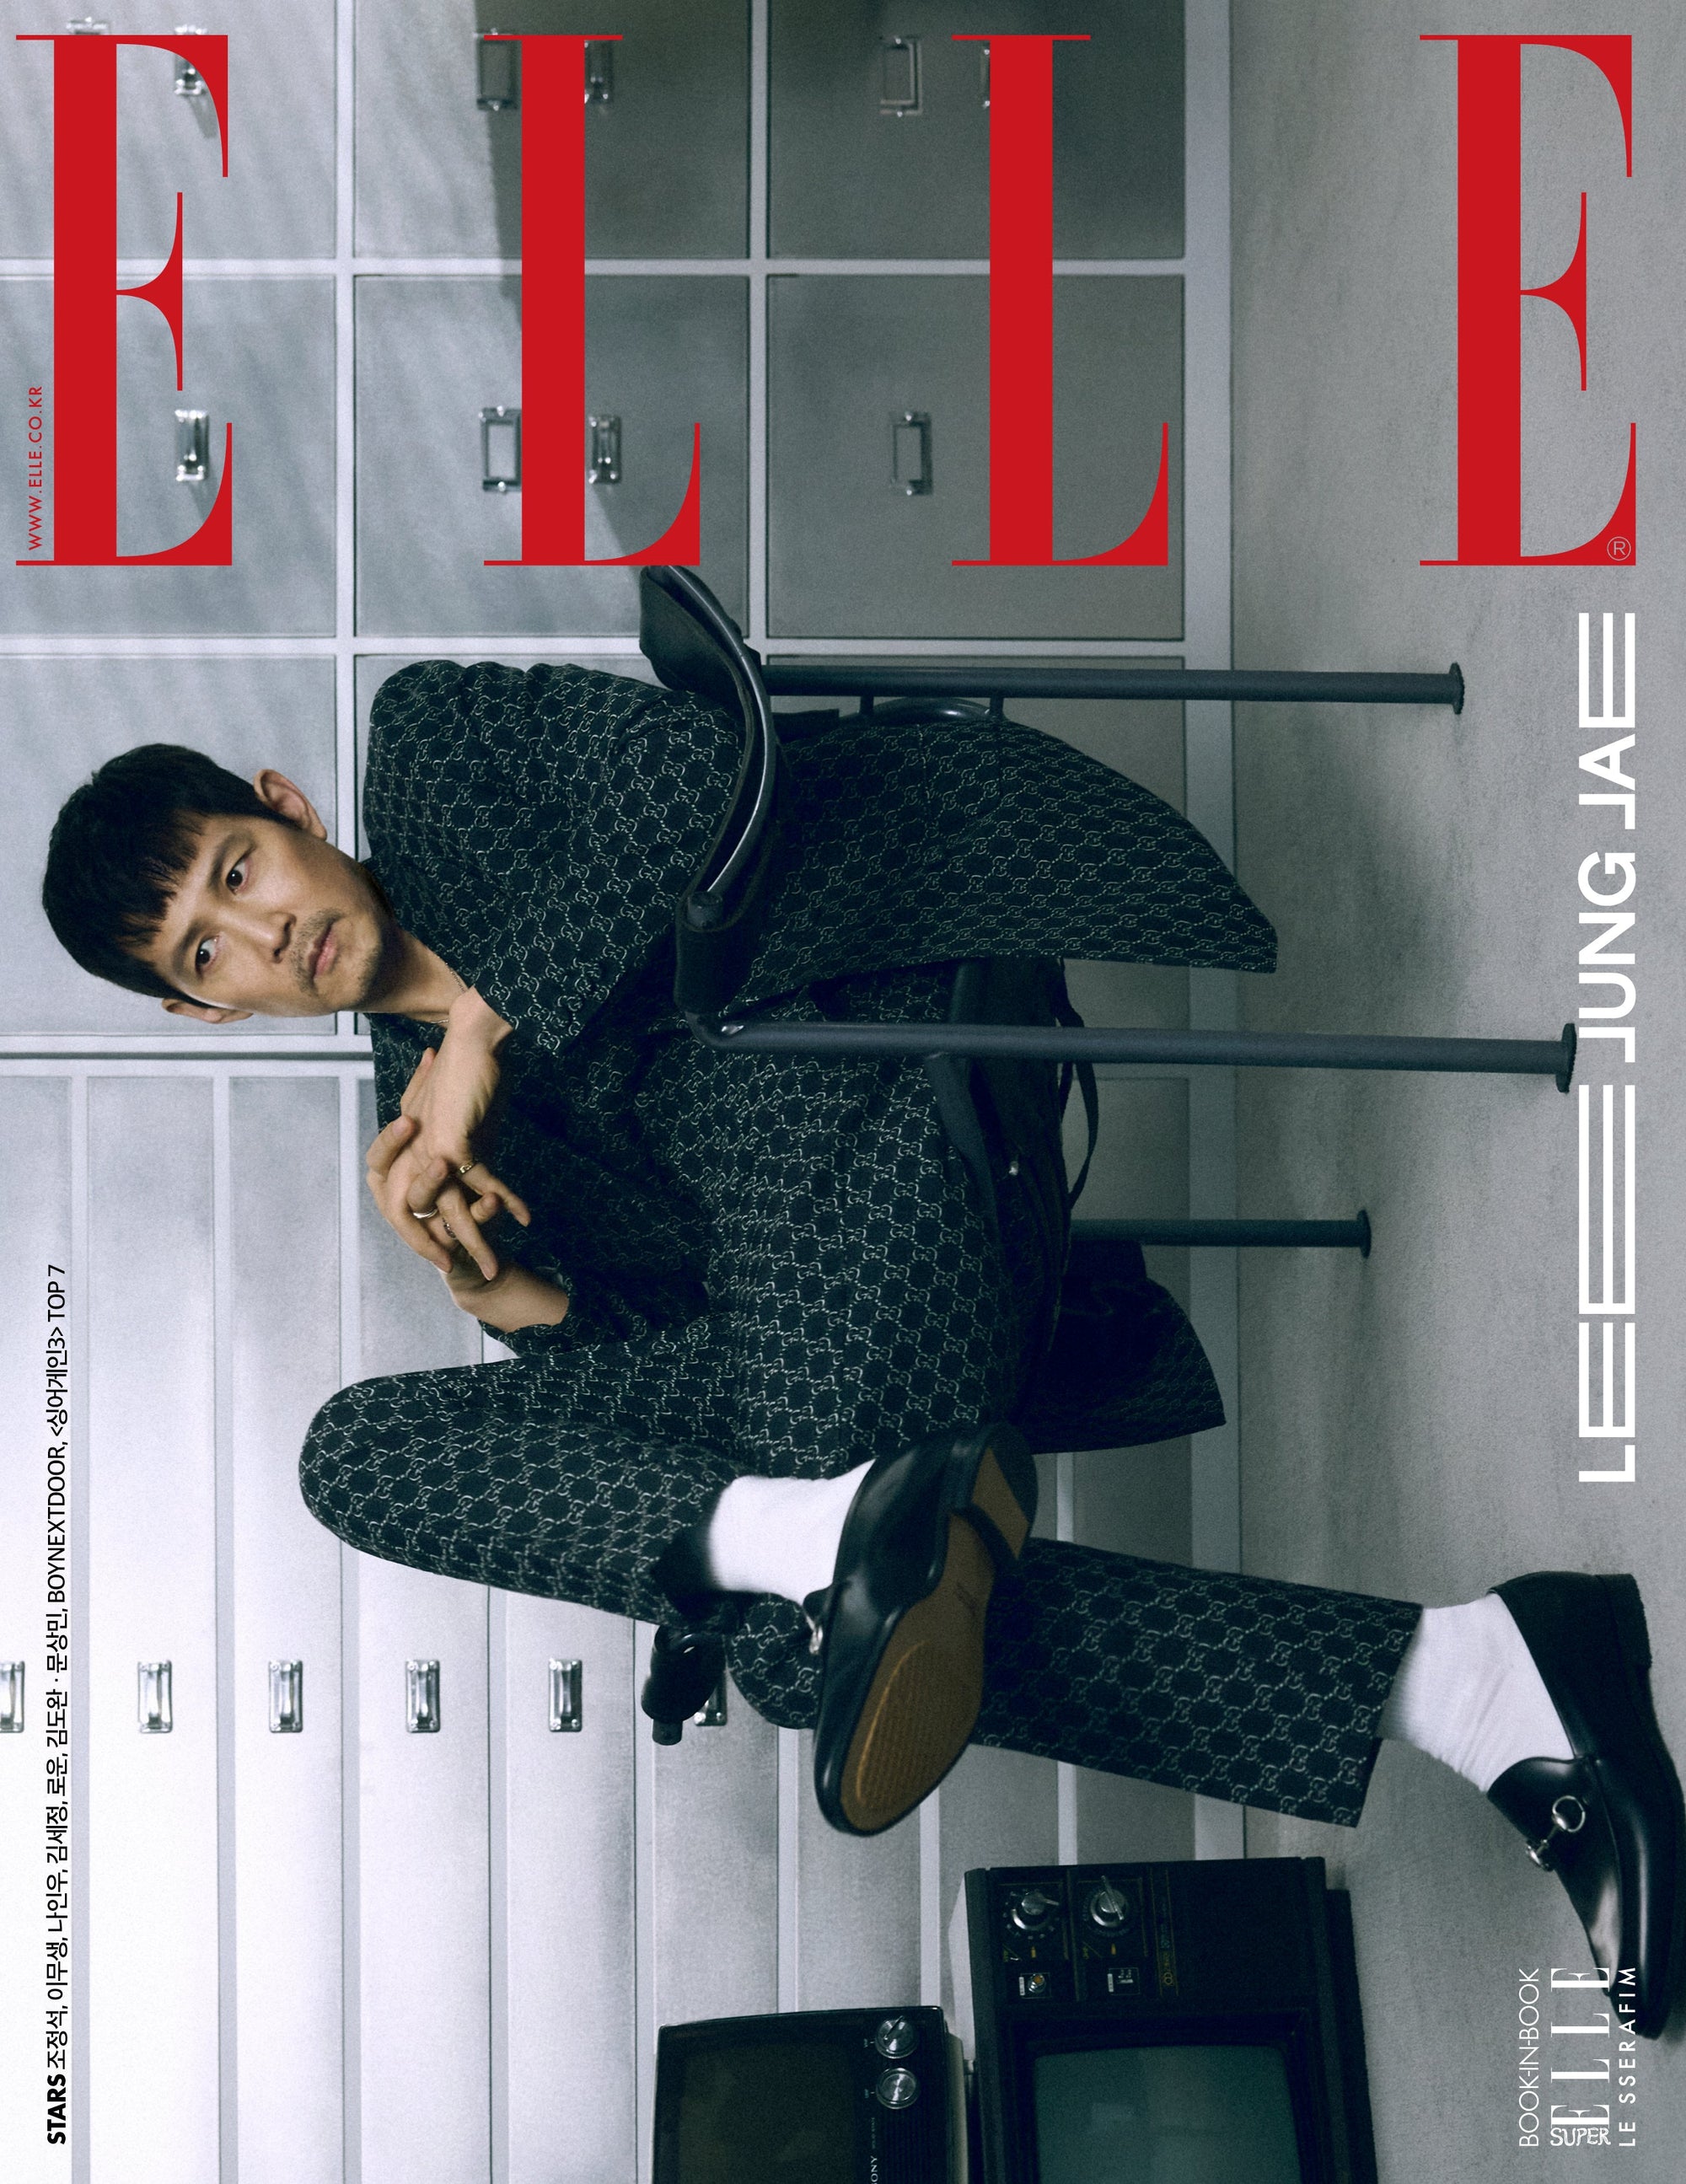 NewJeans' Minji on Cover of Elle Magazine (March 2023 Issue) – Kpop Omo